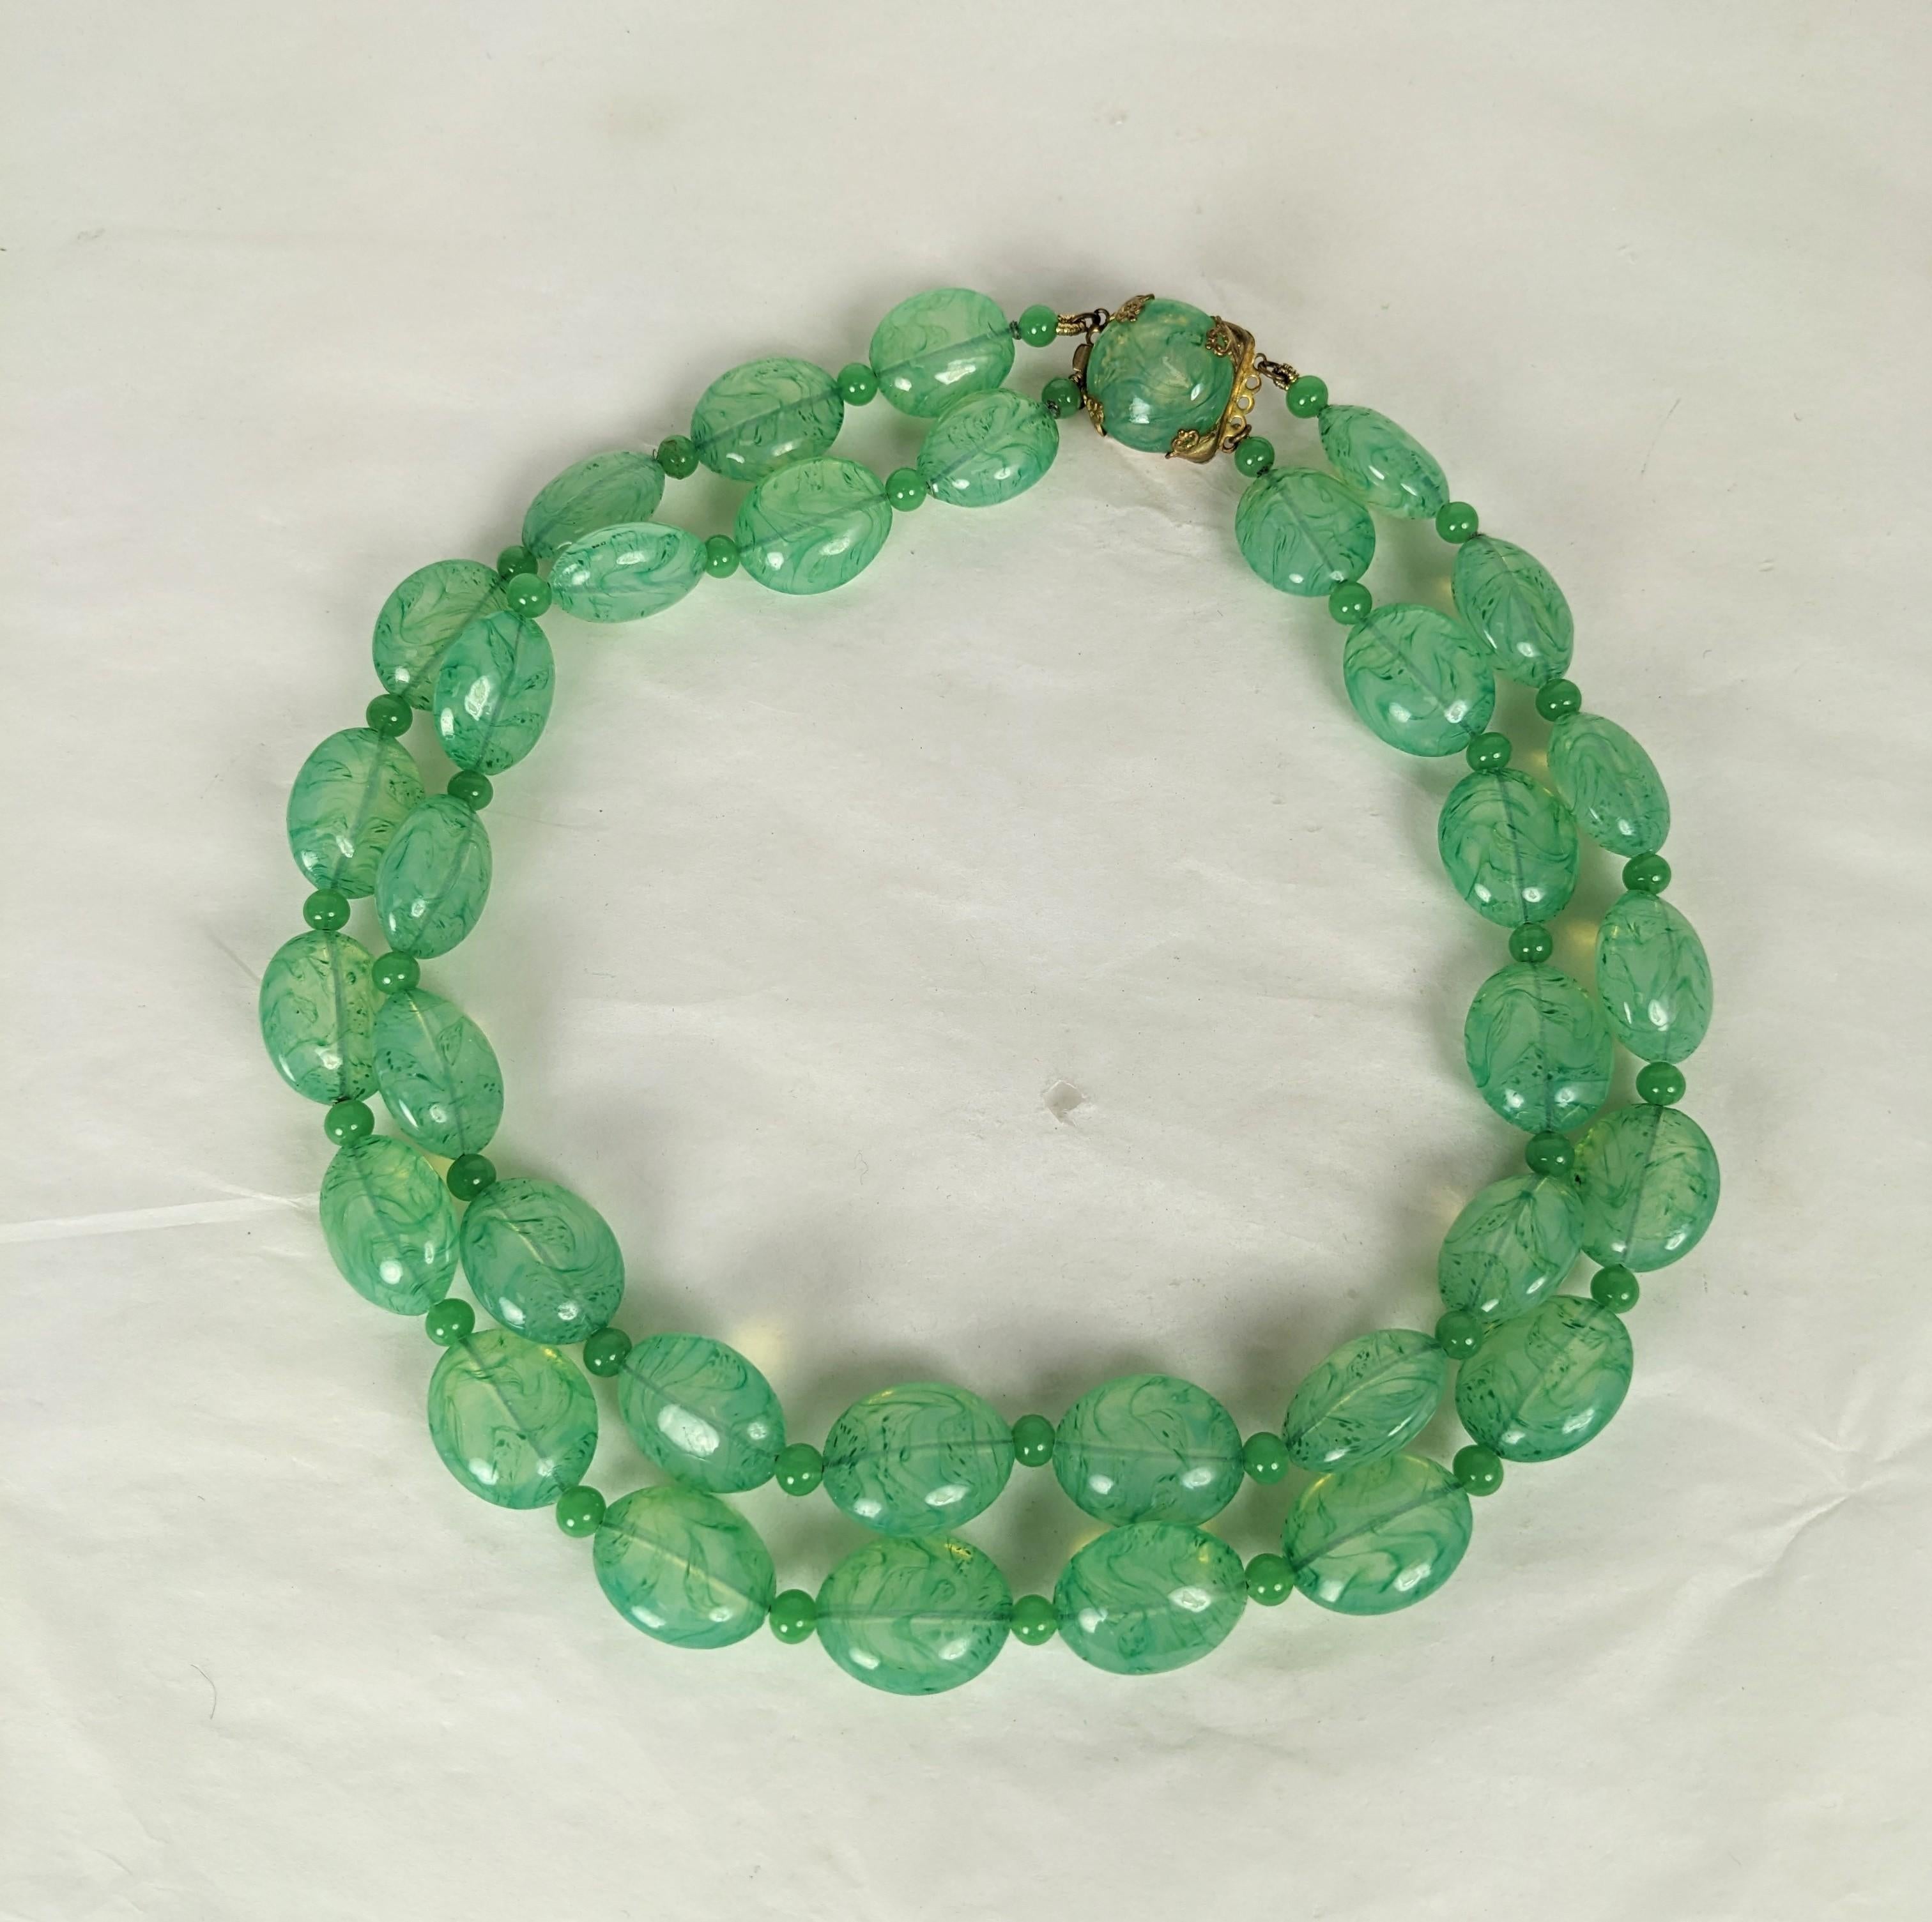 French Poured Glass Faux Jade Beads from the 1950's.  Double strand with hand made mottled Gripoix glass beads and spacers in variegated jade tones with gilt filigree clasp.  17.5